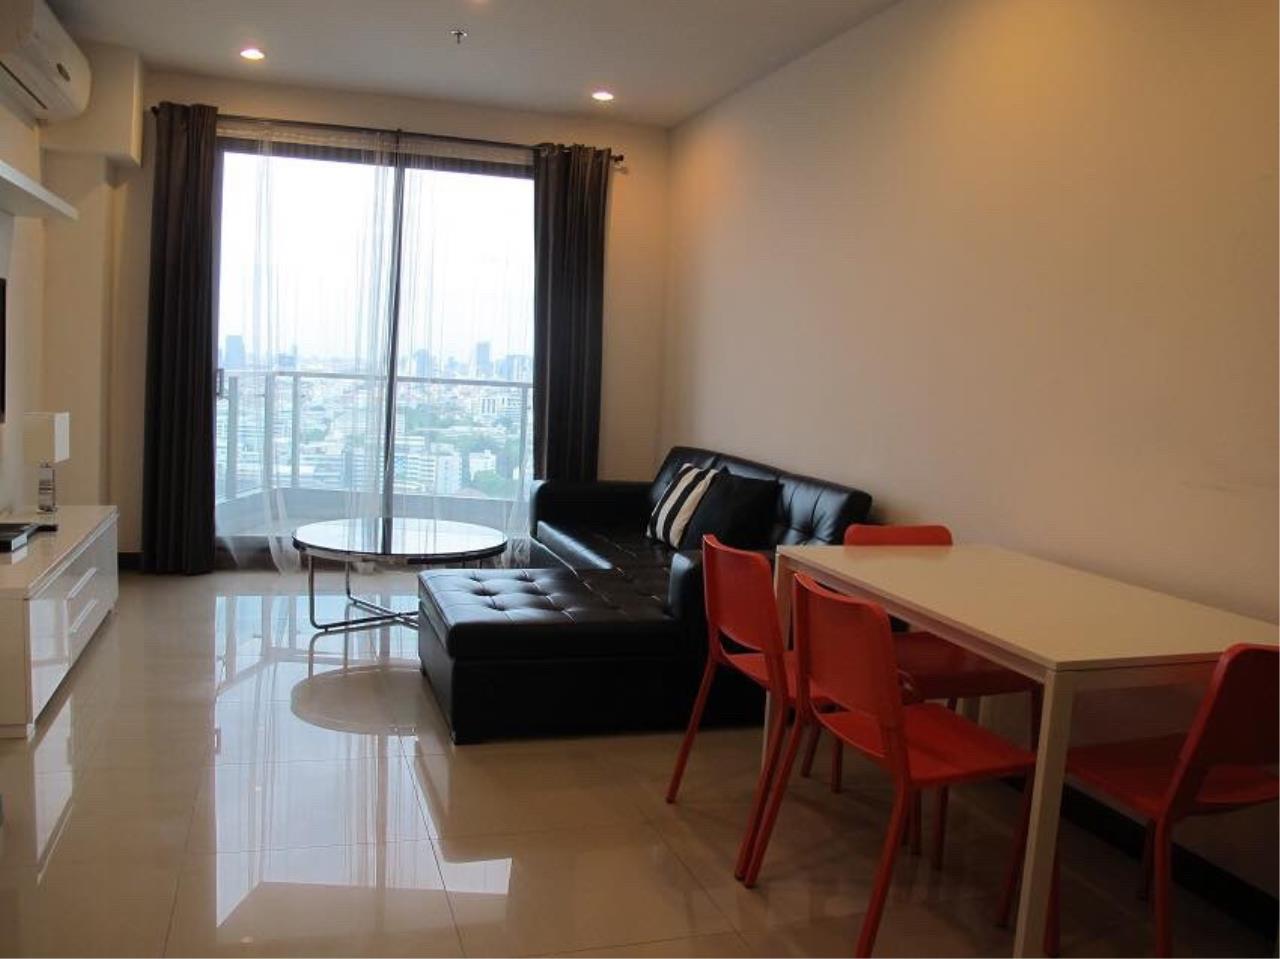 Agent - Phapayawarin Agency's For Sale :  Supalai Premier Ratchathewi, great city view, 1 bedroom 1 bathroom, 62.39 sq.m  1